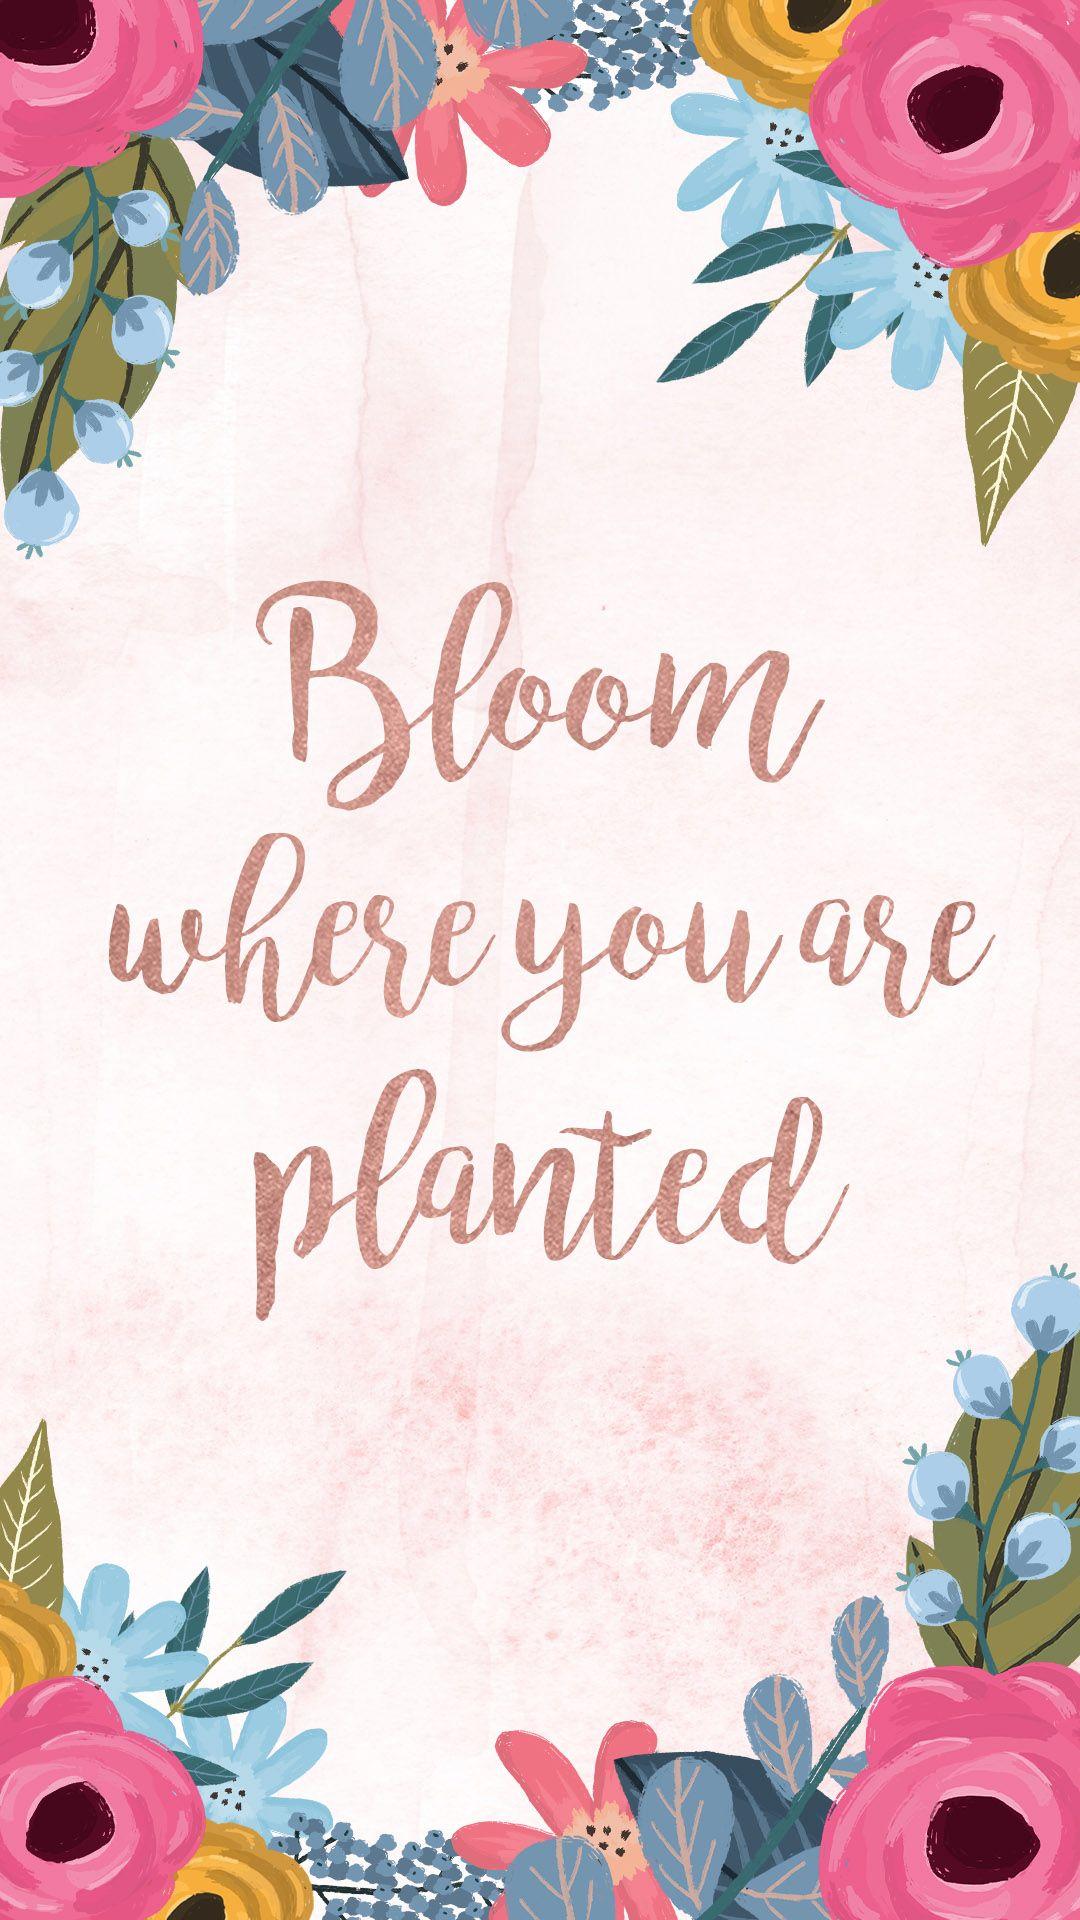 Bloom Where You Are Planted Wallpapers - Top Free Bloom Where You Are ...